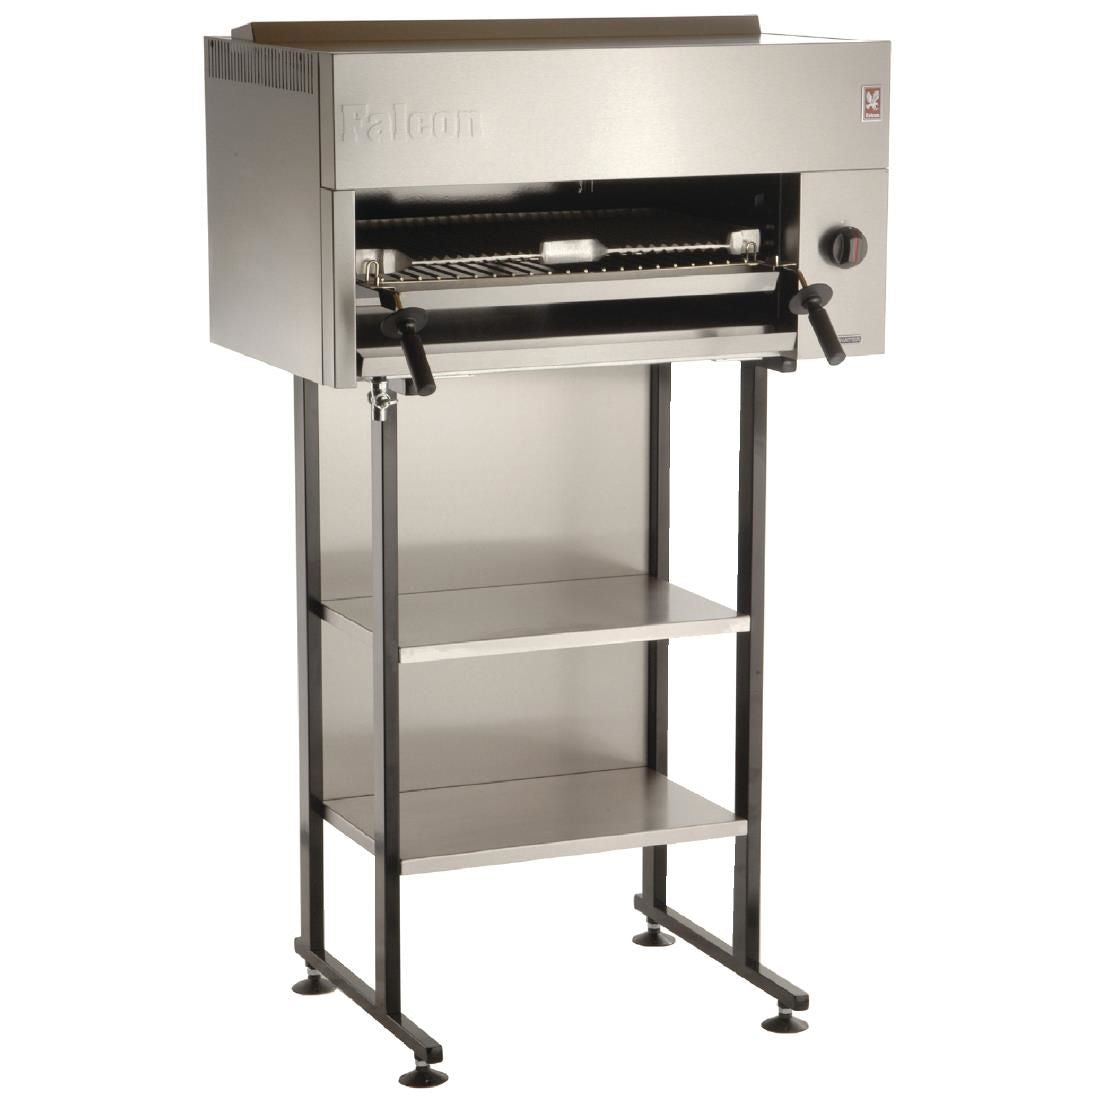 Floor Stand for Falcon Chieftain Gas Grill JD Catering Equipment Solutions Ltd